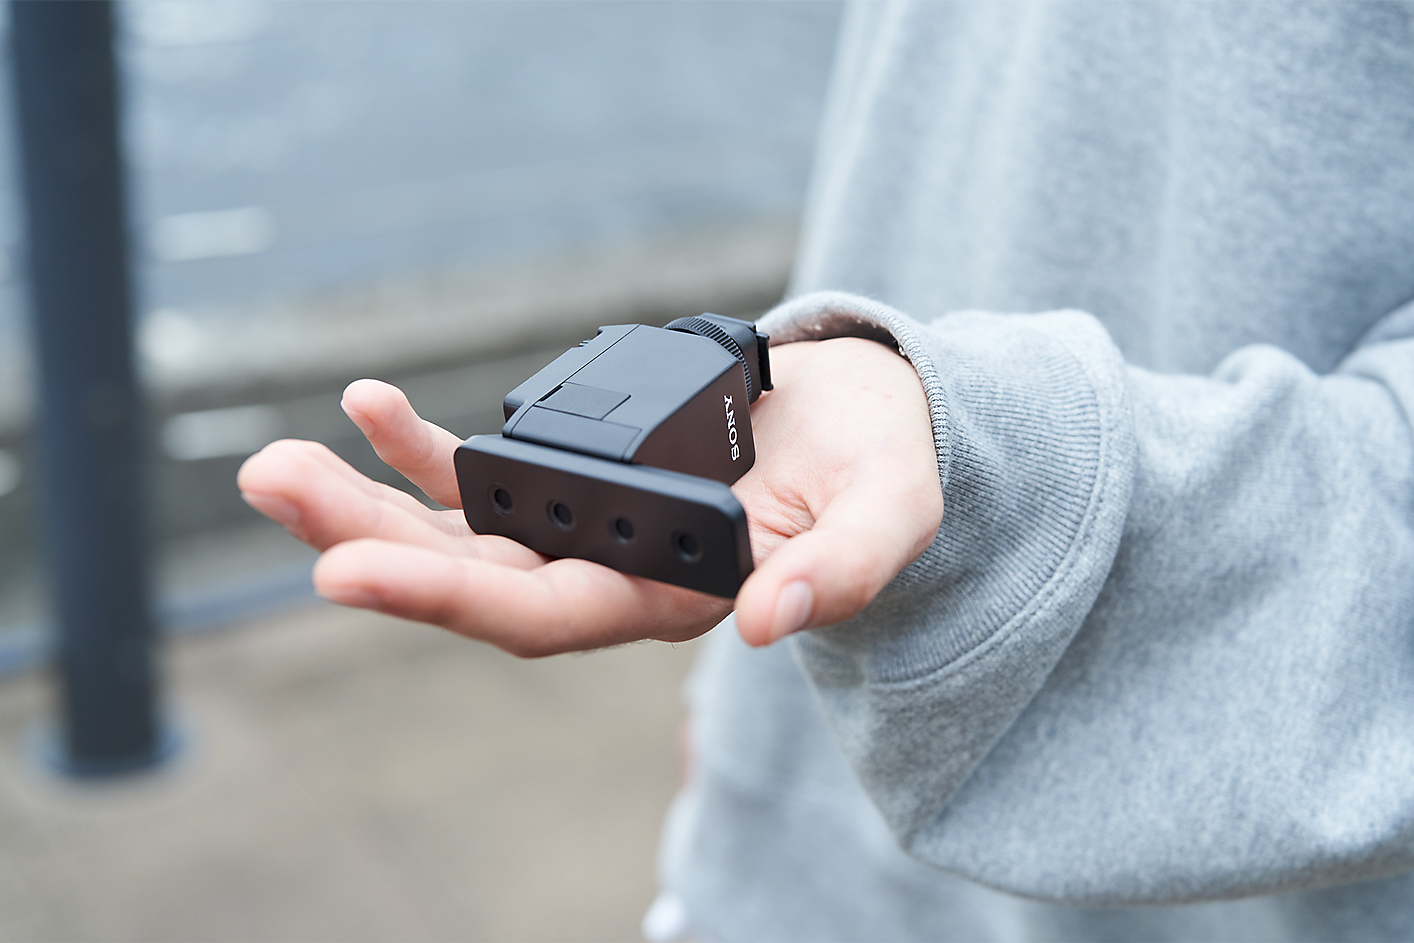 Image of a compact product that can be carried in one hand